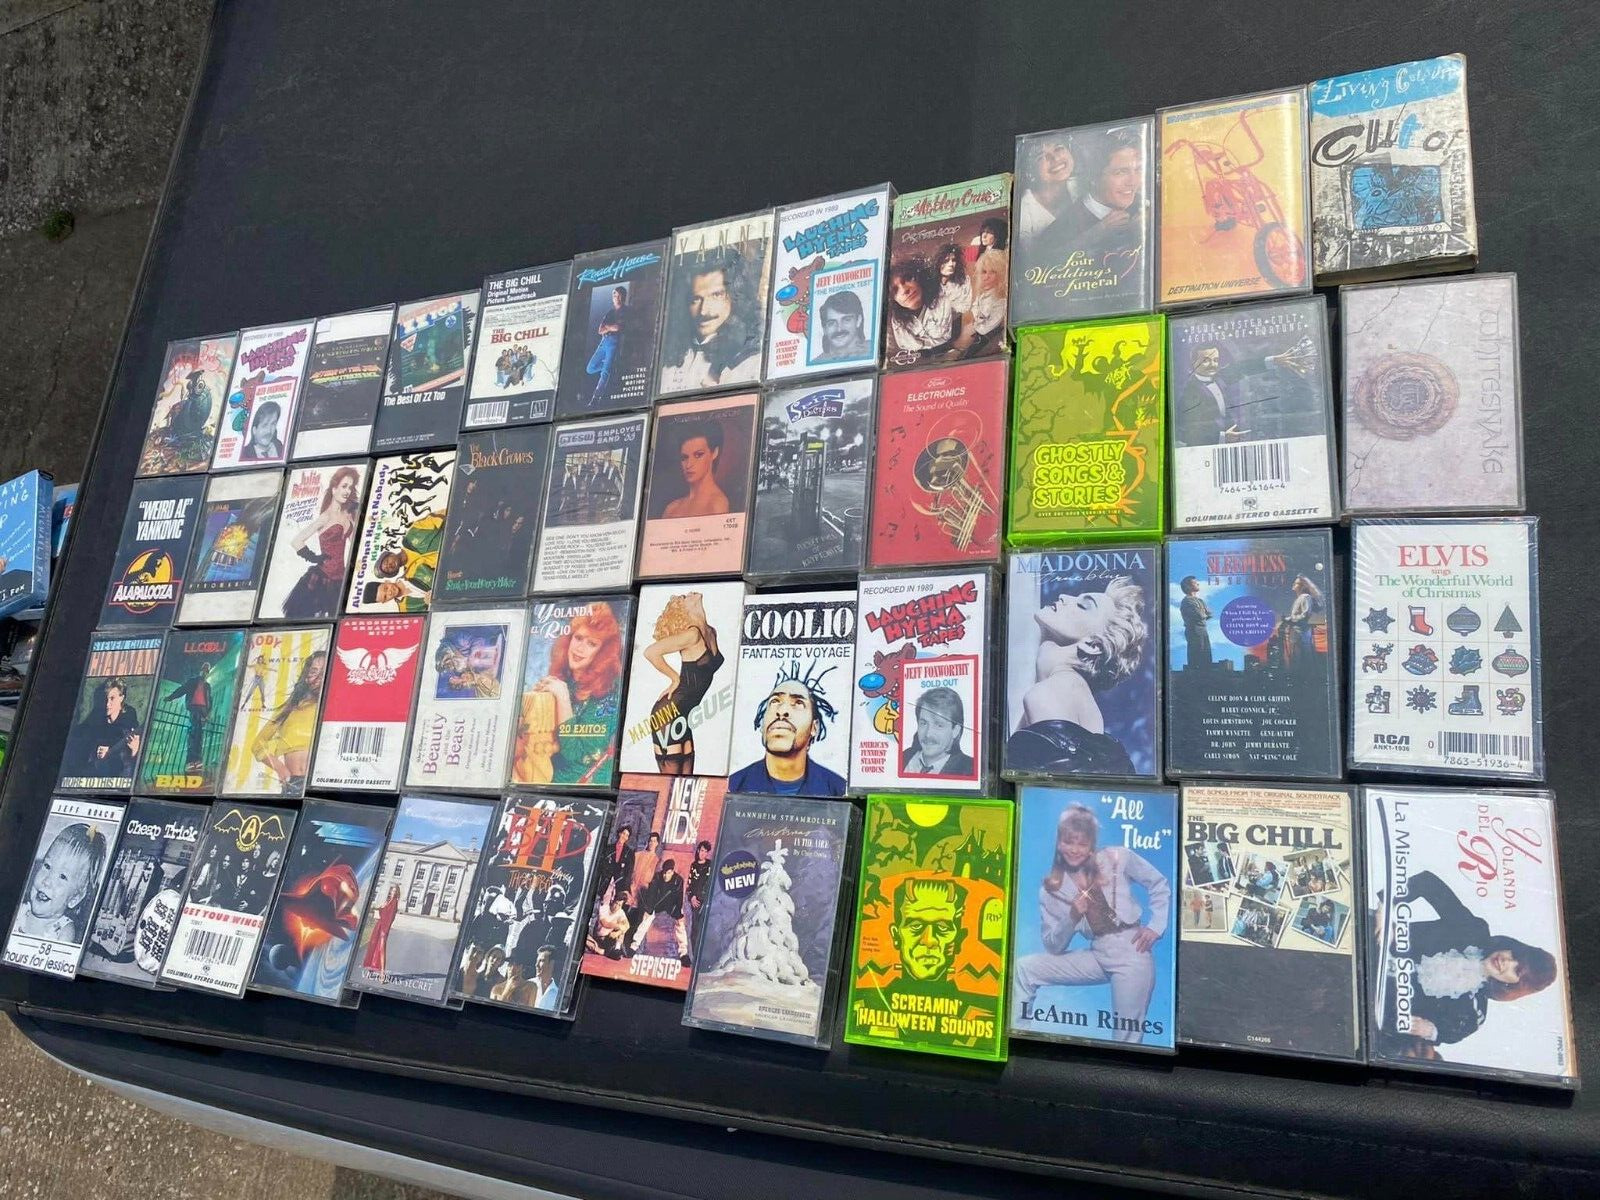 Lot of 48 Vintage Audio Cassettes / Tapes - All Genres of Music & Misc.